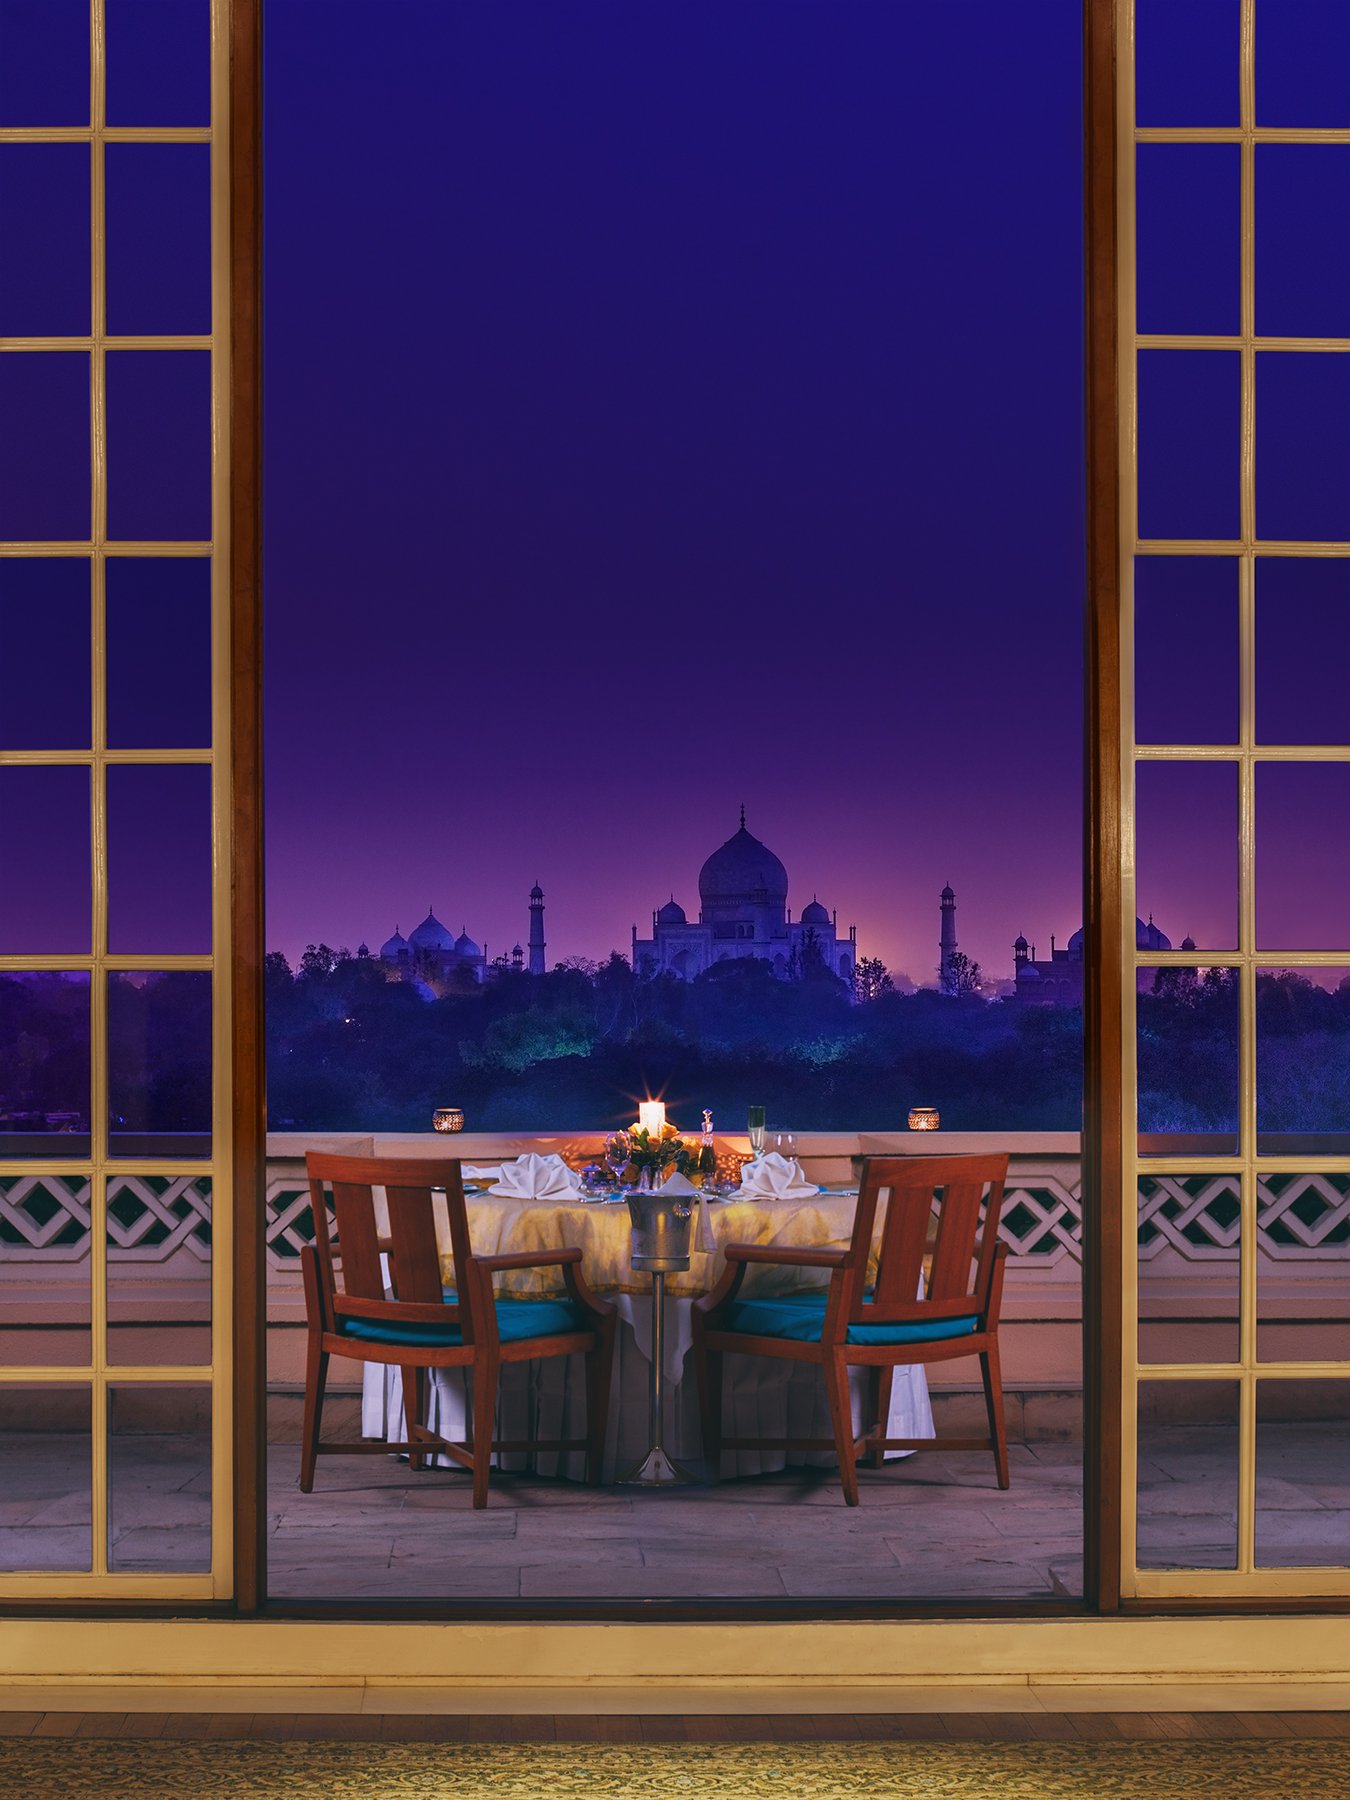 The view from Oberoi Amarvilas in Agra, India